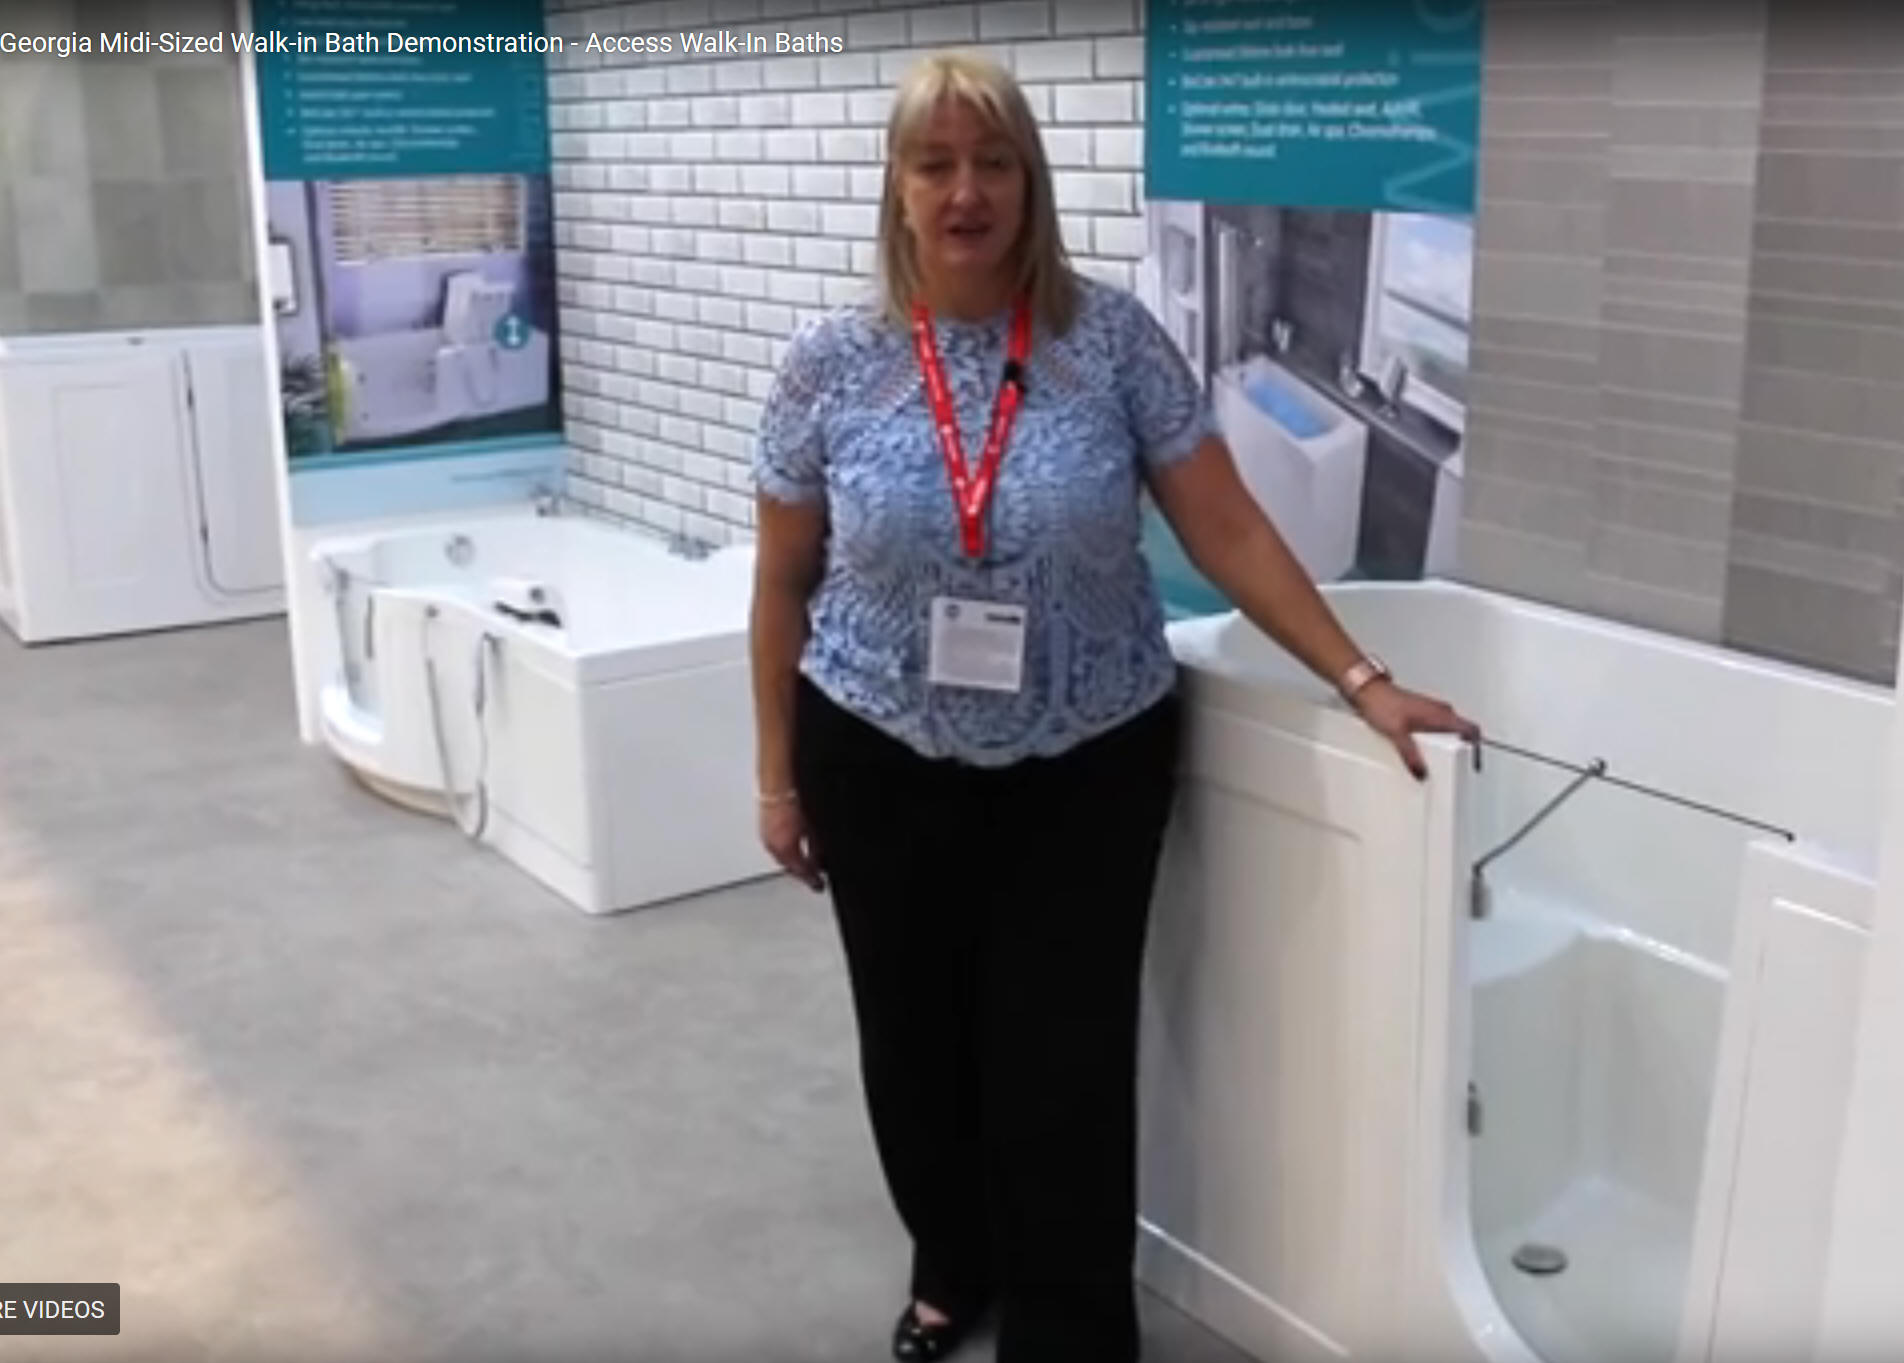 Let Clare show you round the Georgia tub style walk in bath with this informative video